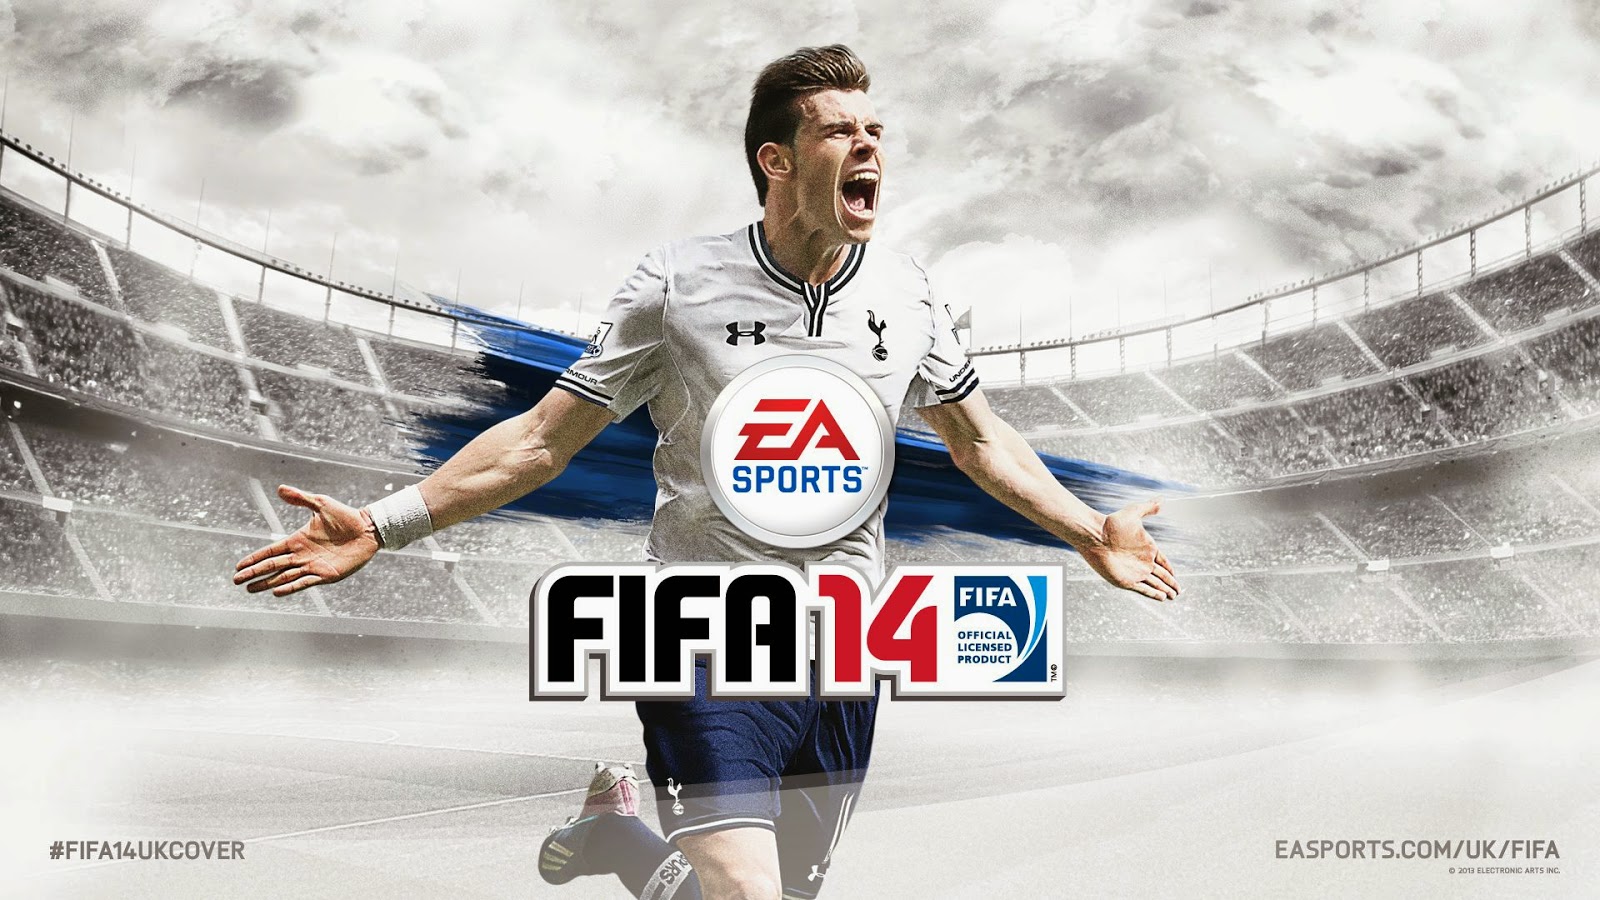 Fifa World Cup 2014 Free Download PC Game